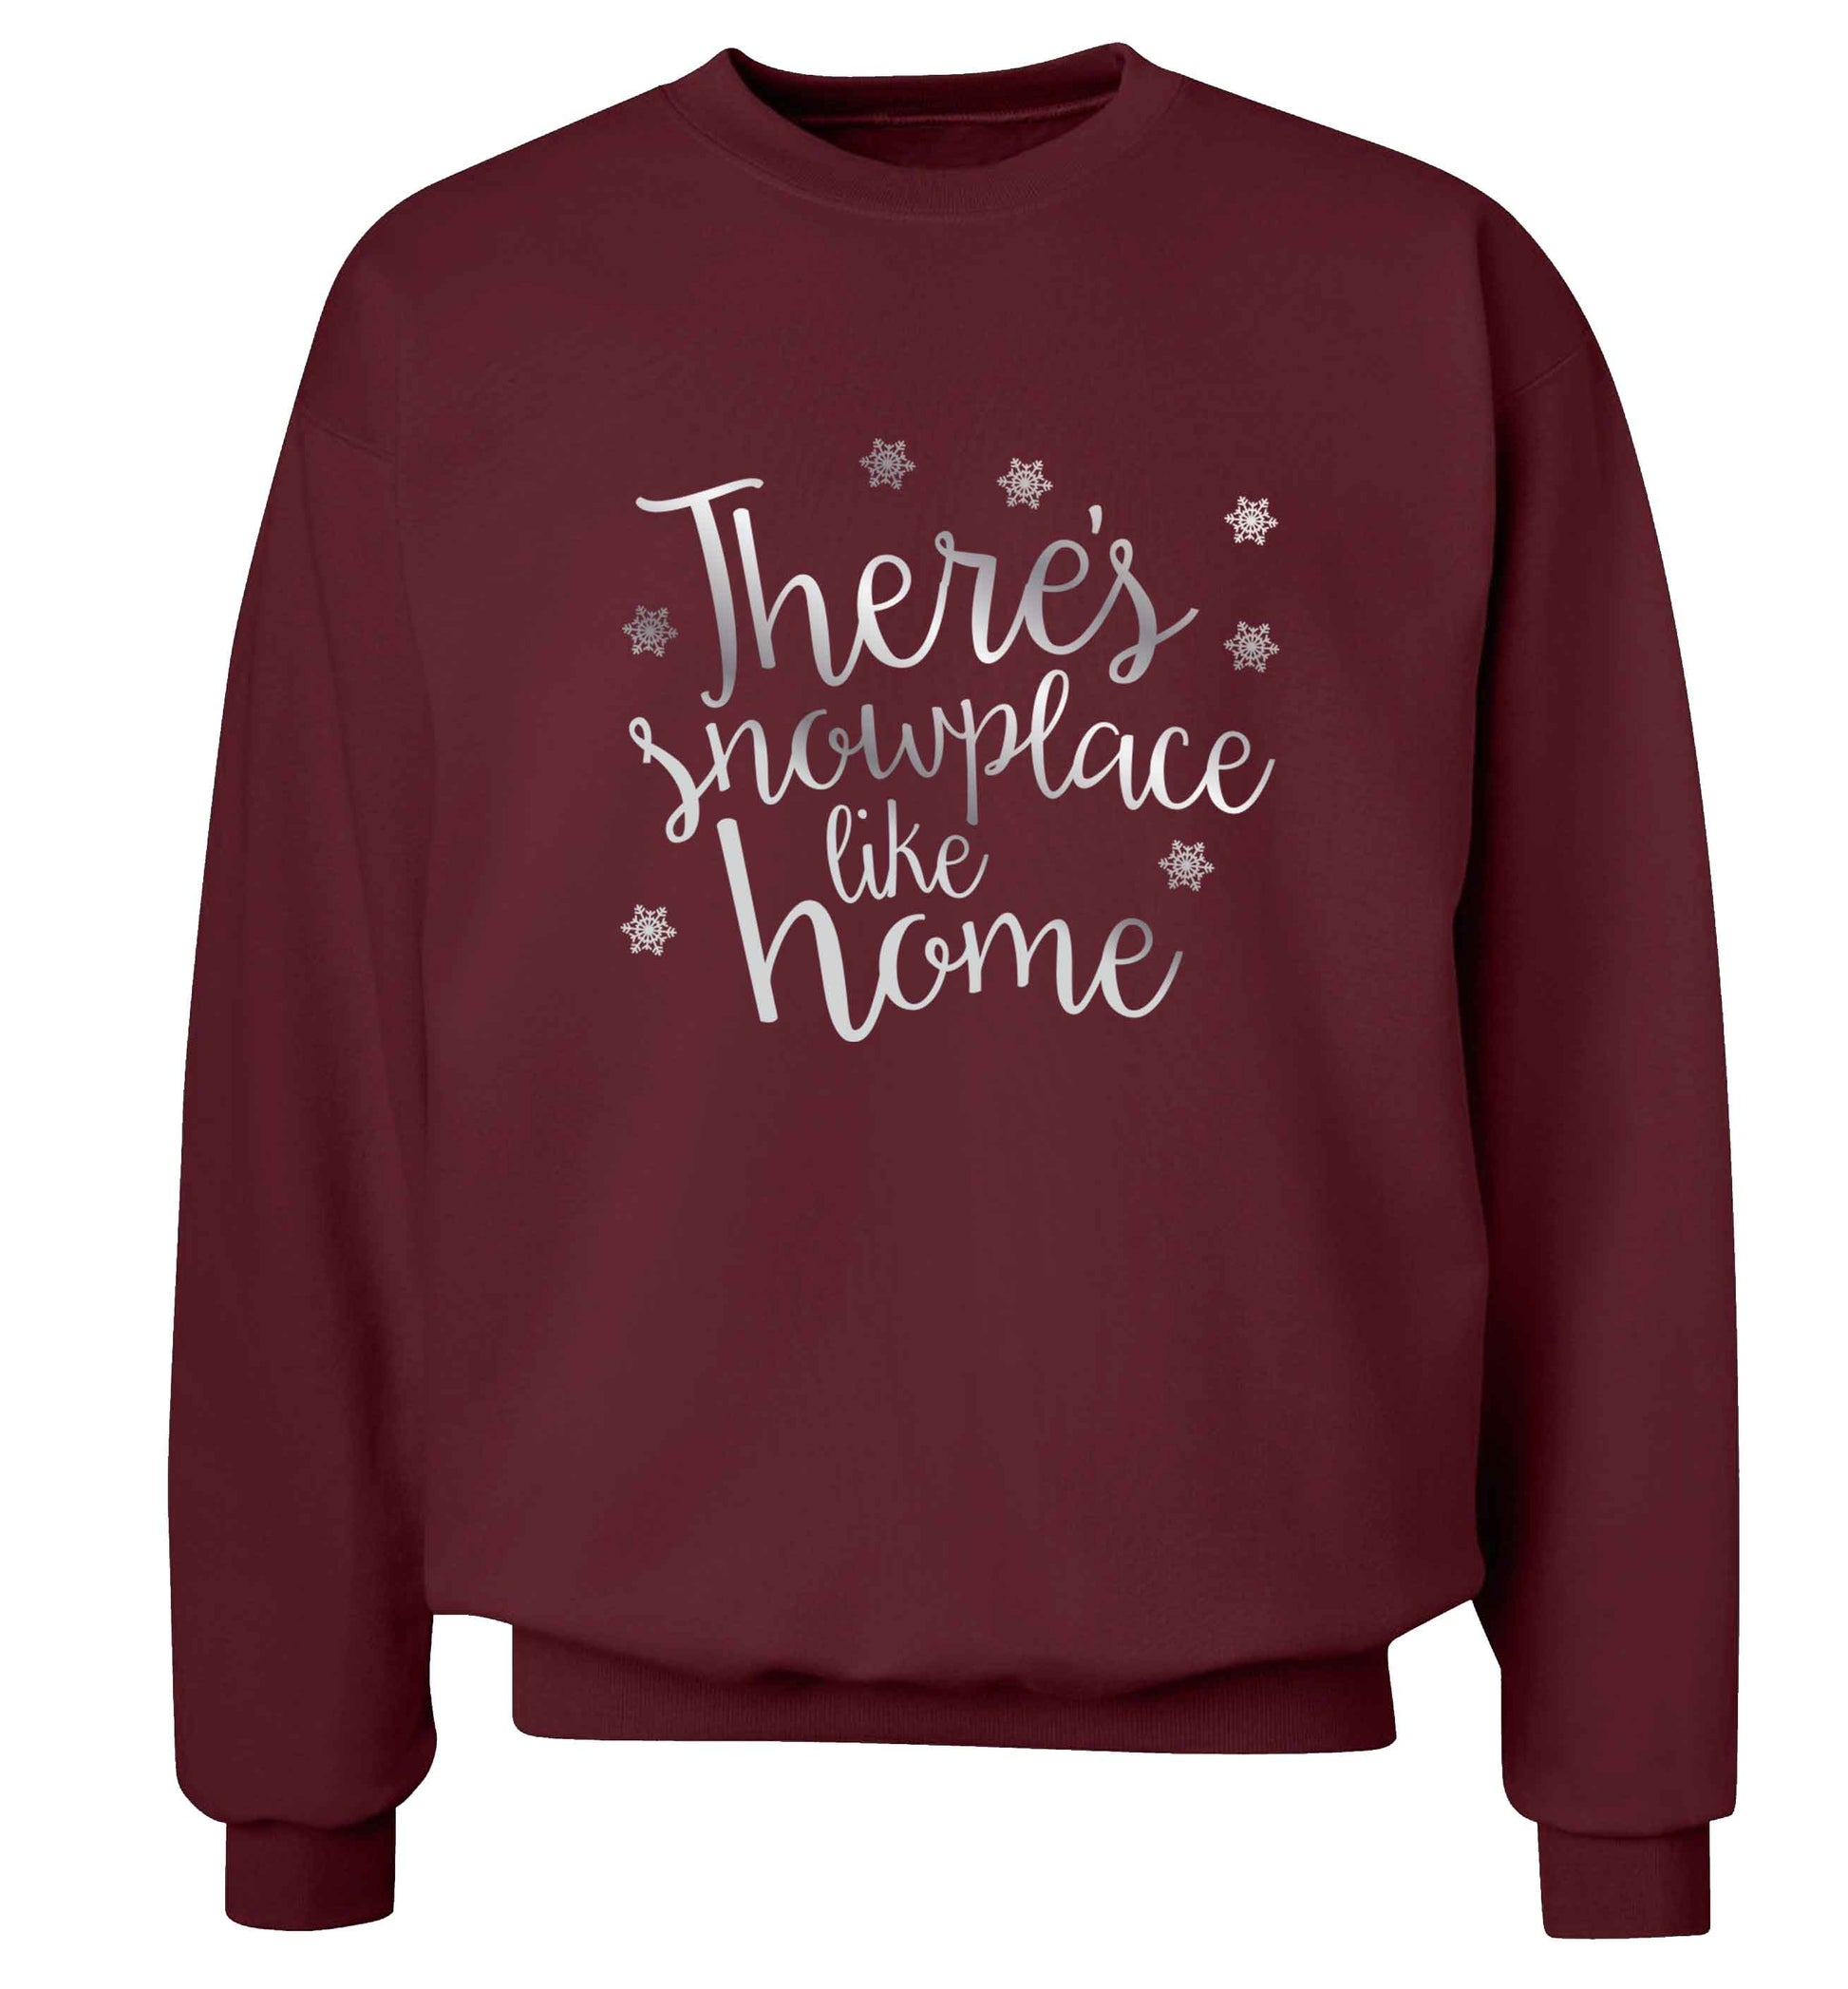 There's snowplace like home - metallic silver adult's unisex maroon sweater 2XL